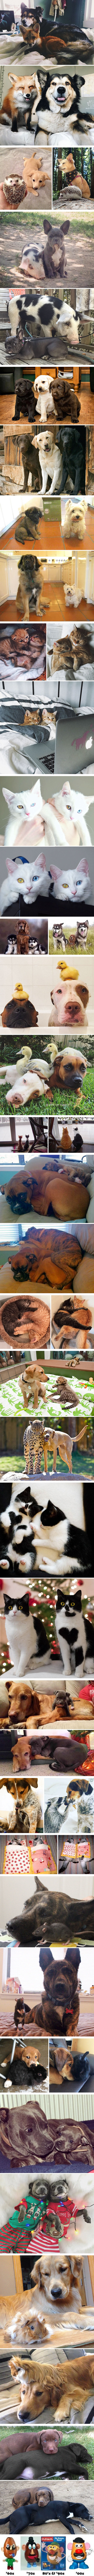 22 Before And After Photos Of Animals Growing Up Together